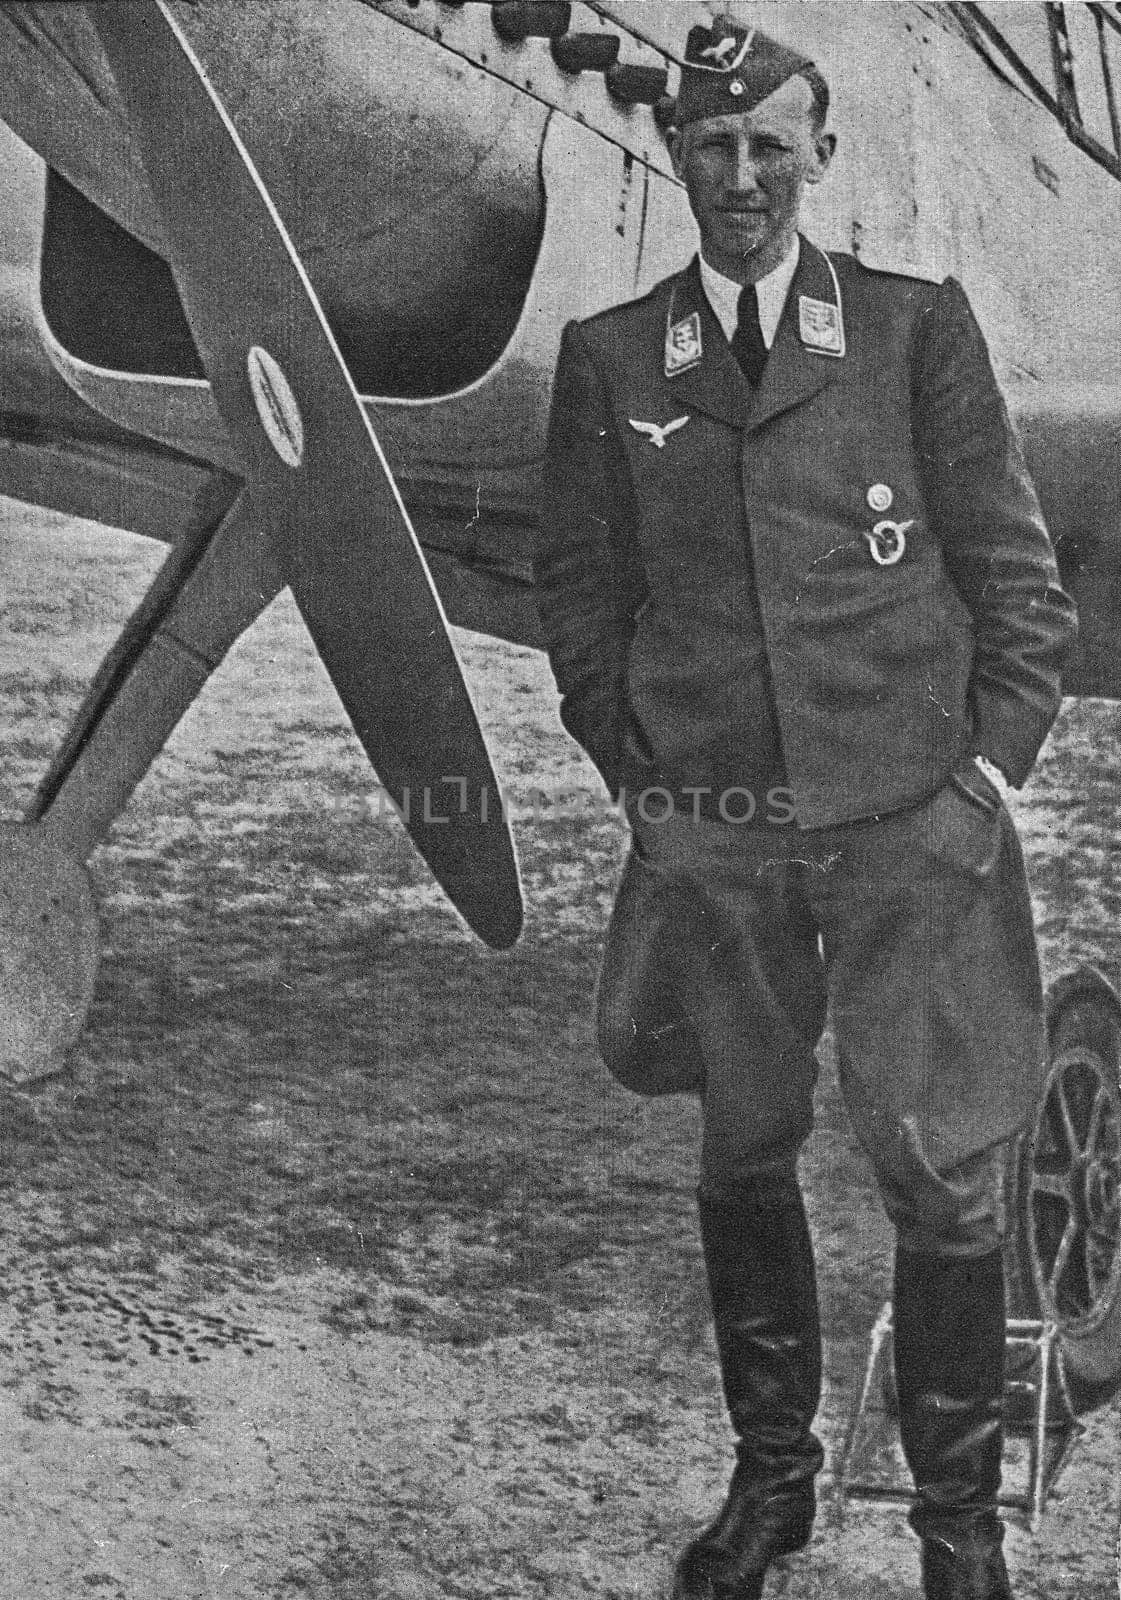 Reinhard Heydrich was also a major in the Luftwaffe, flying nearly 100 combat missions until 22 July 1941, when his plane was hit by Soviet anti-aircraft fire. Heydrich made an emergency landing behind enemy lines. He evaded a Soviet patrol and contacted a forward German patrol. by roman_nerud